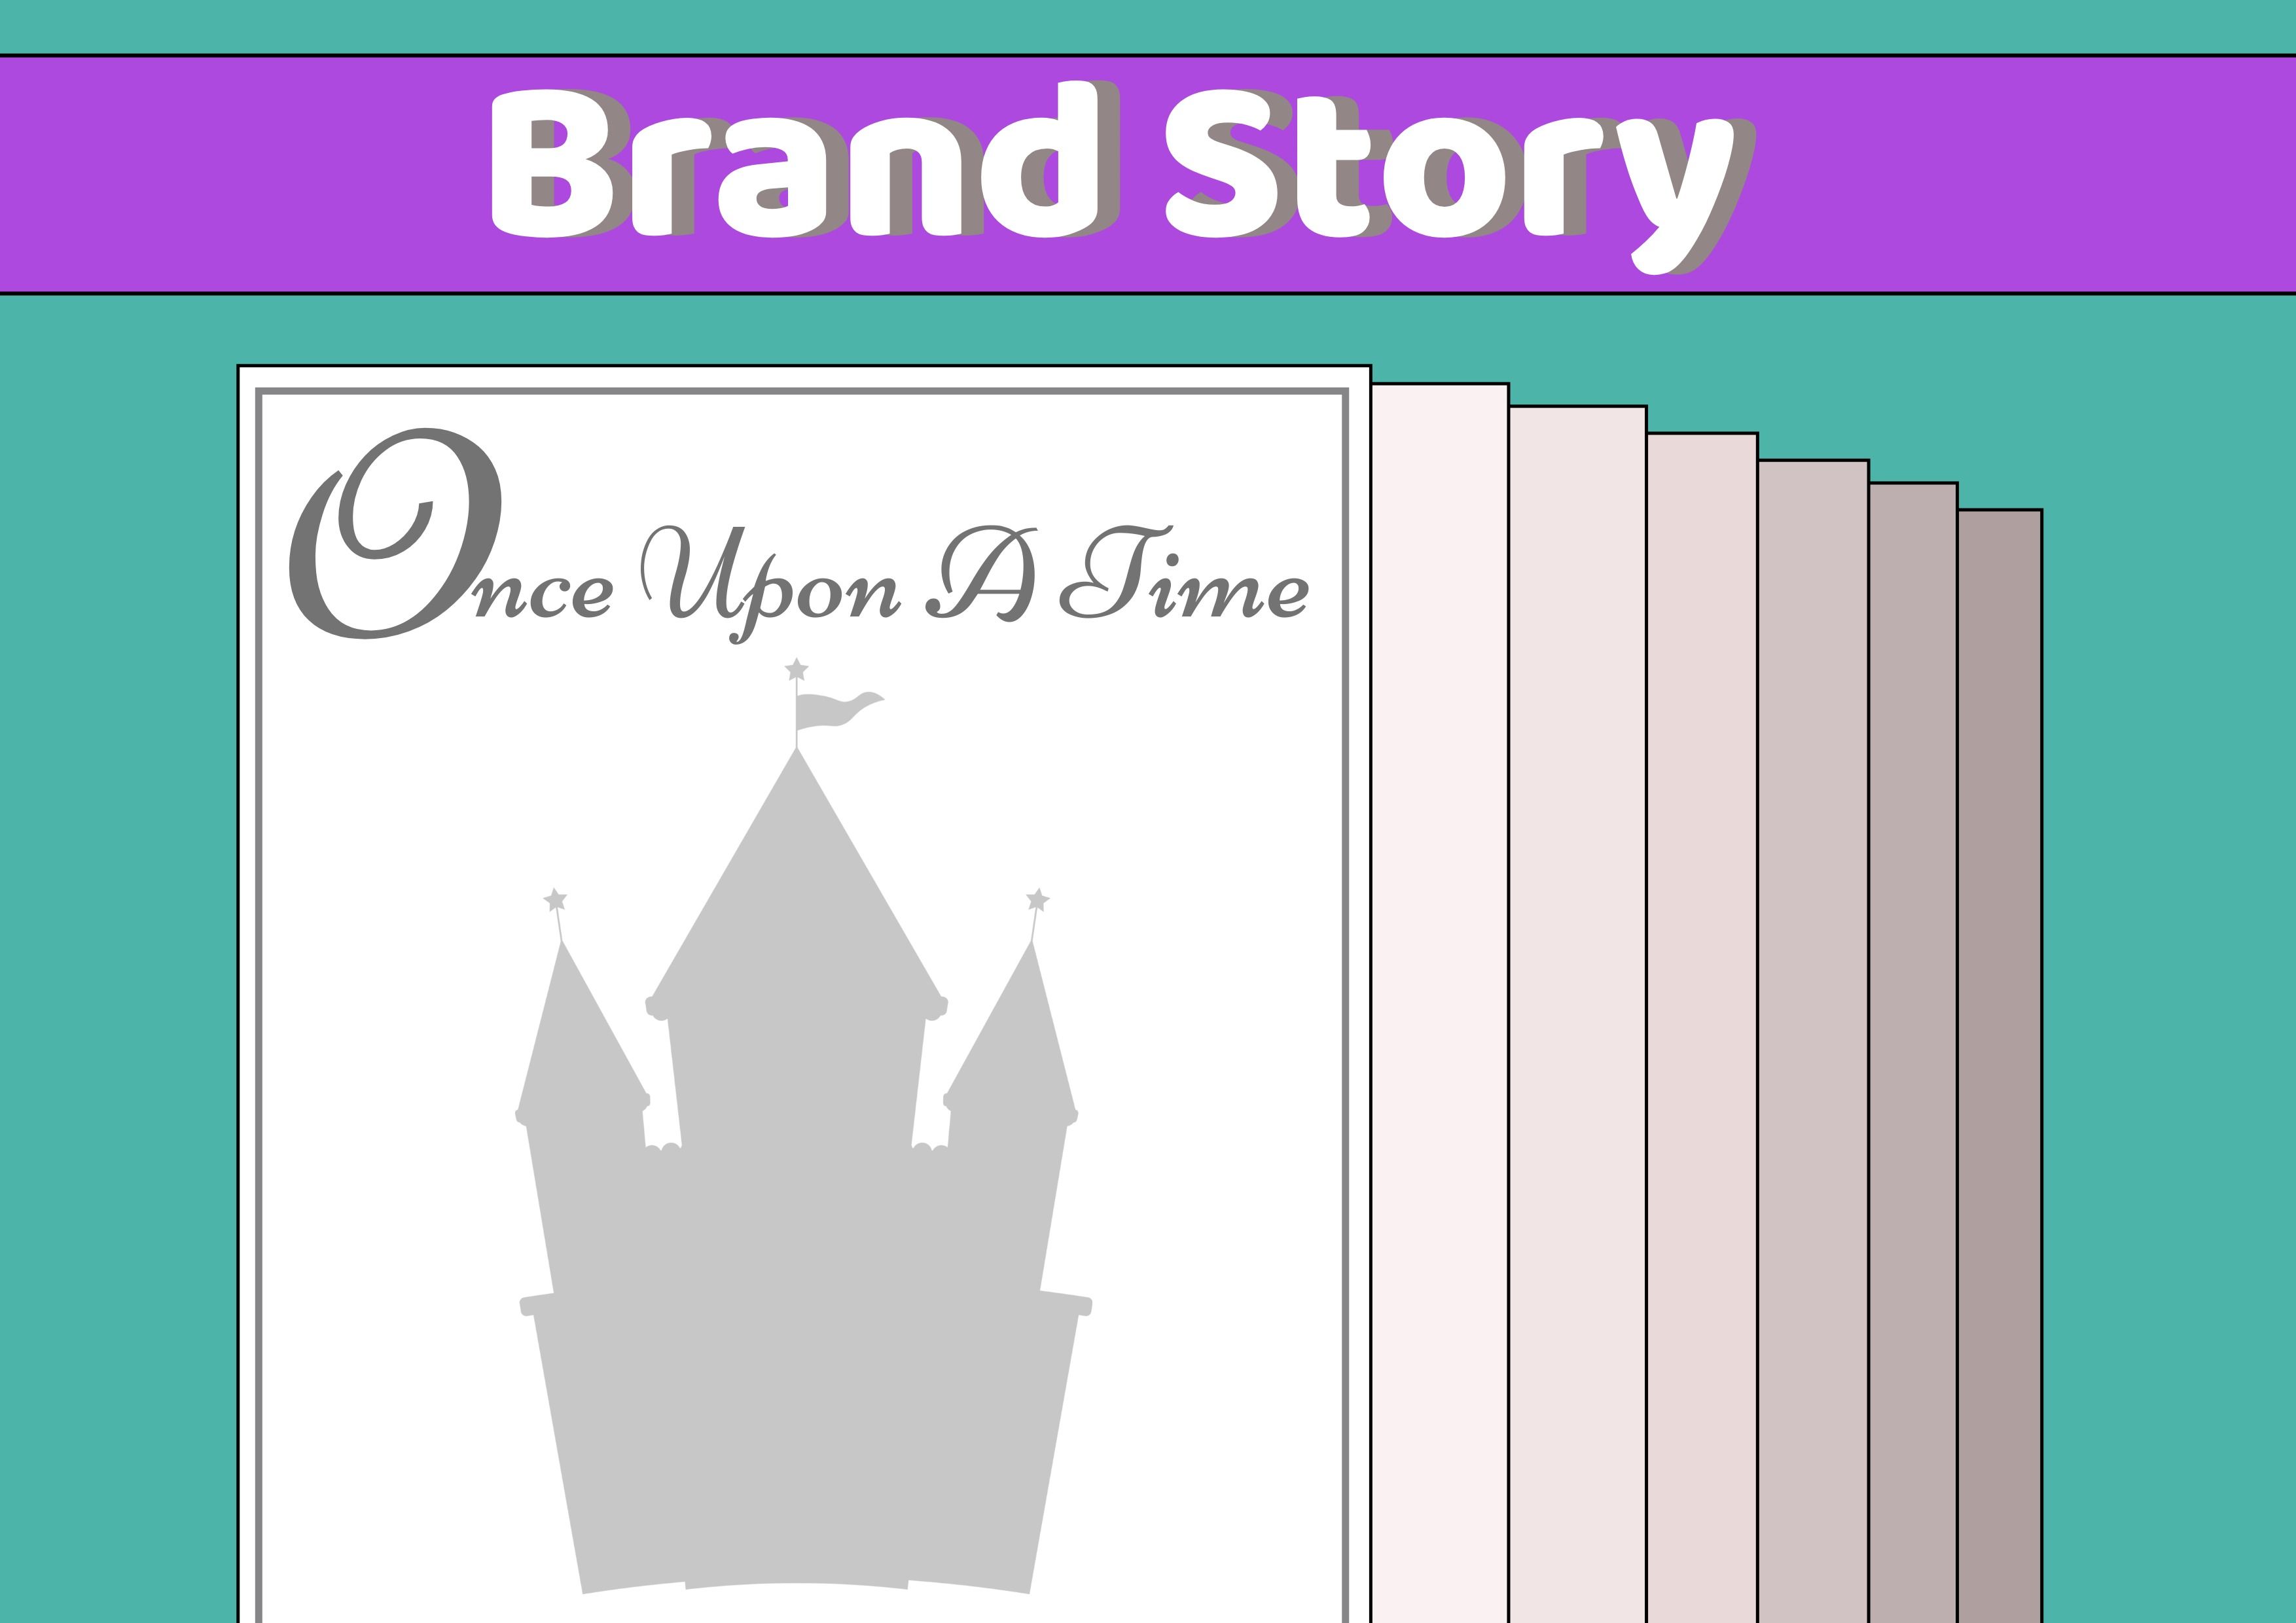 Brand story visualization - How to structure and clarify your brand story - Image